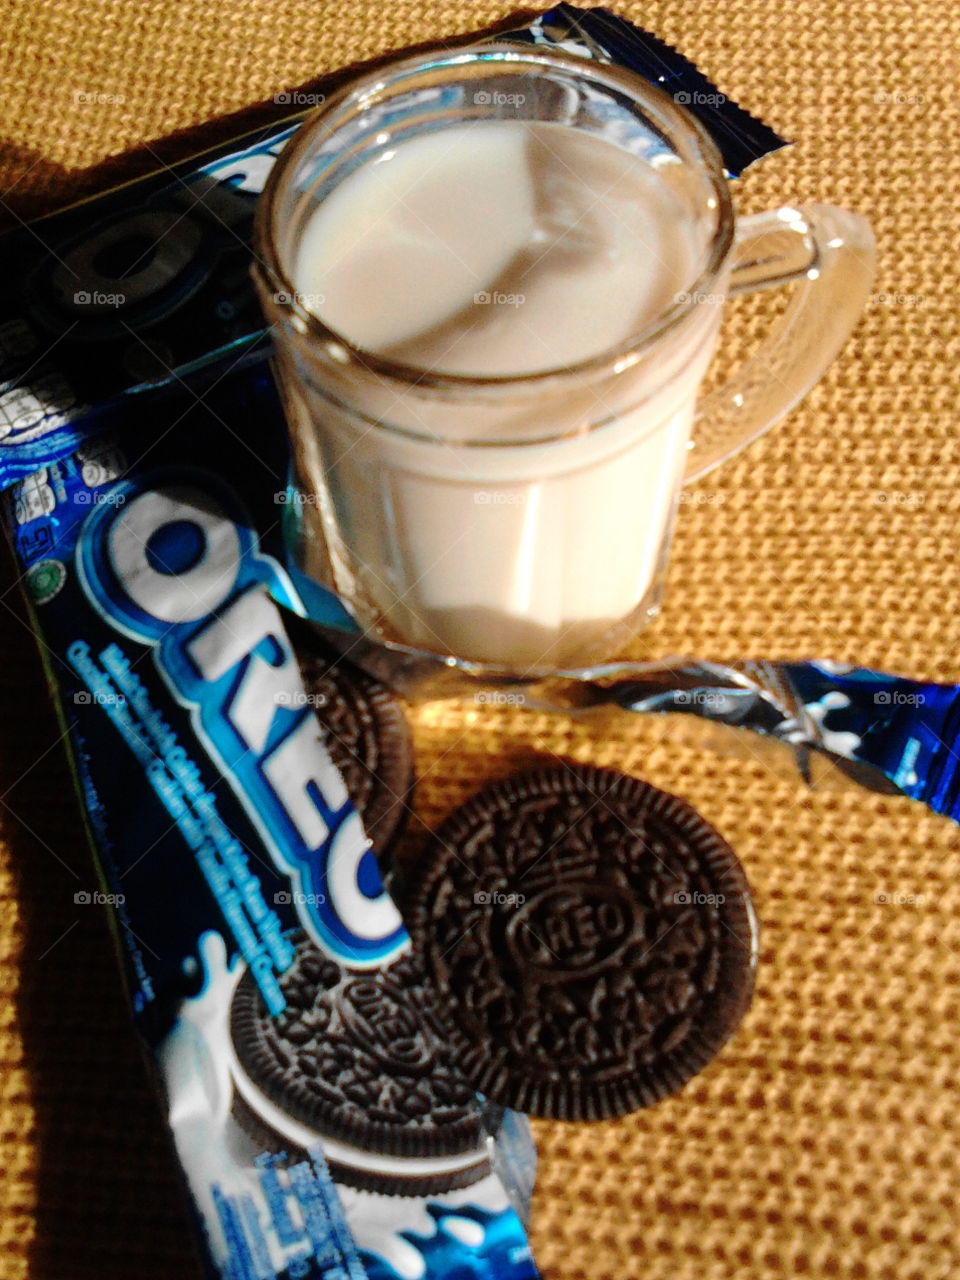 start day with oreo